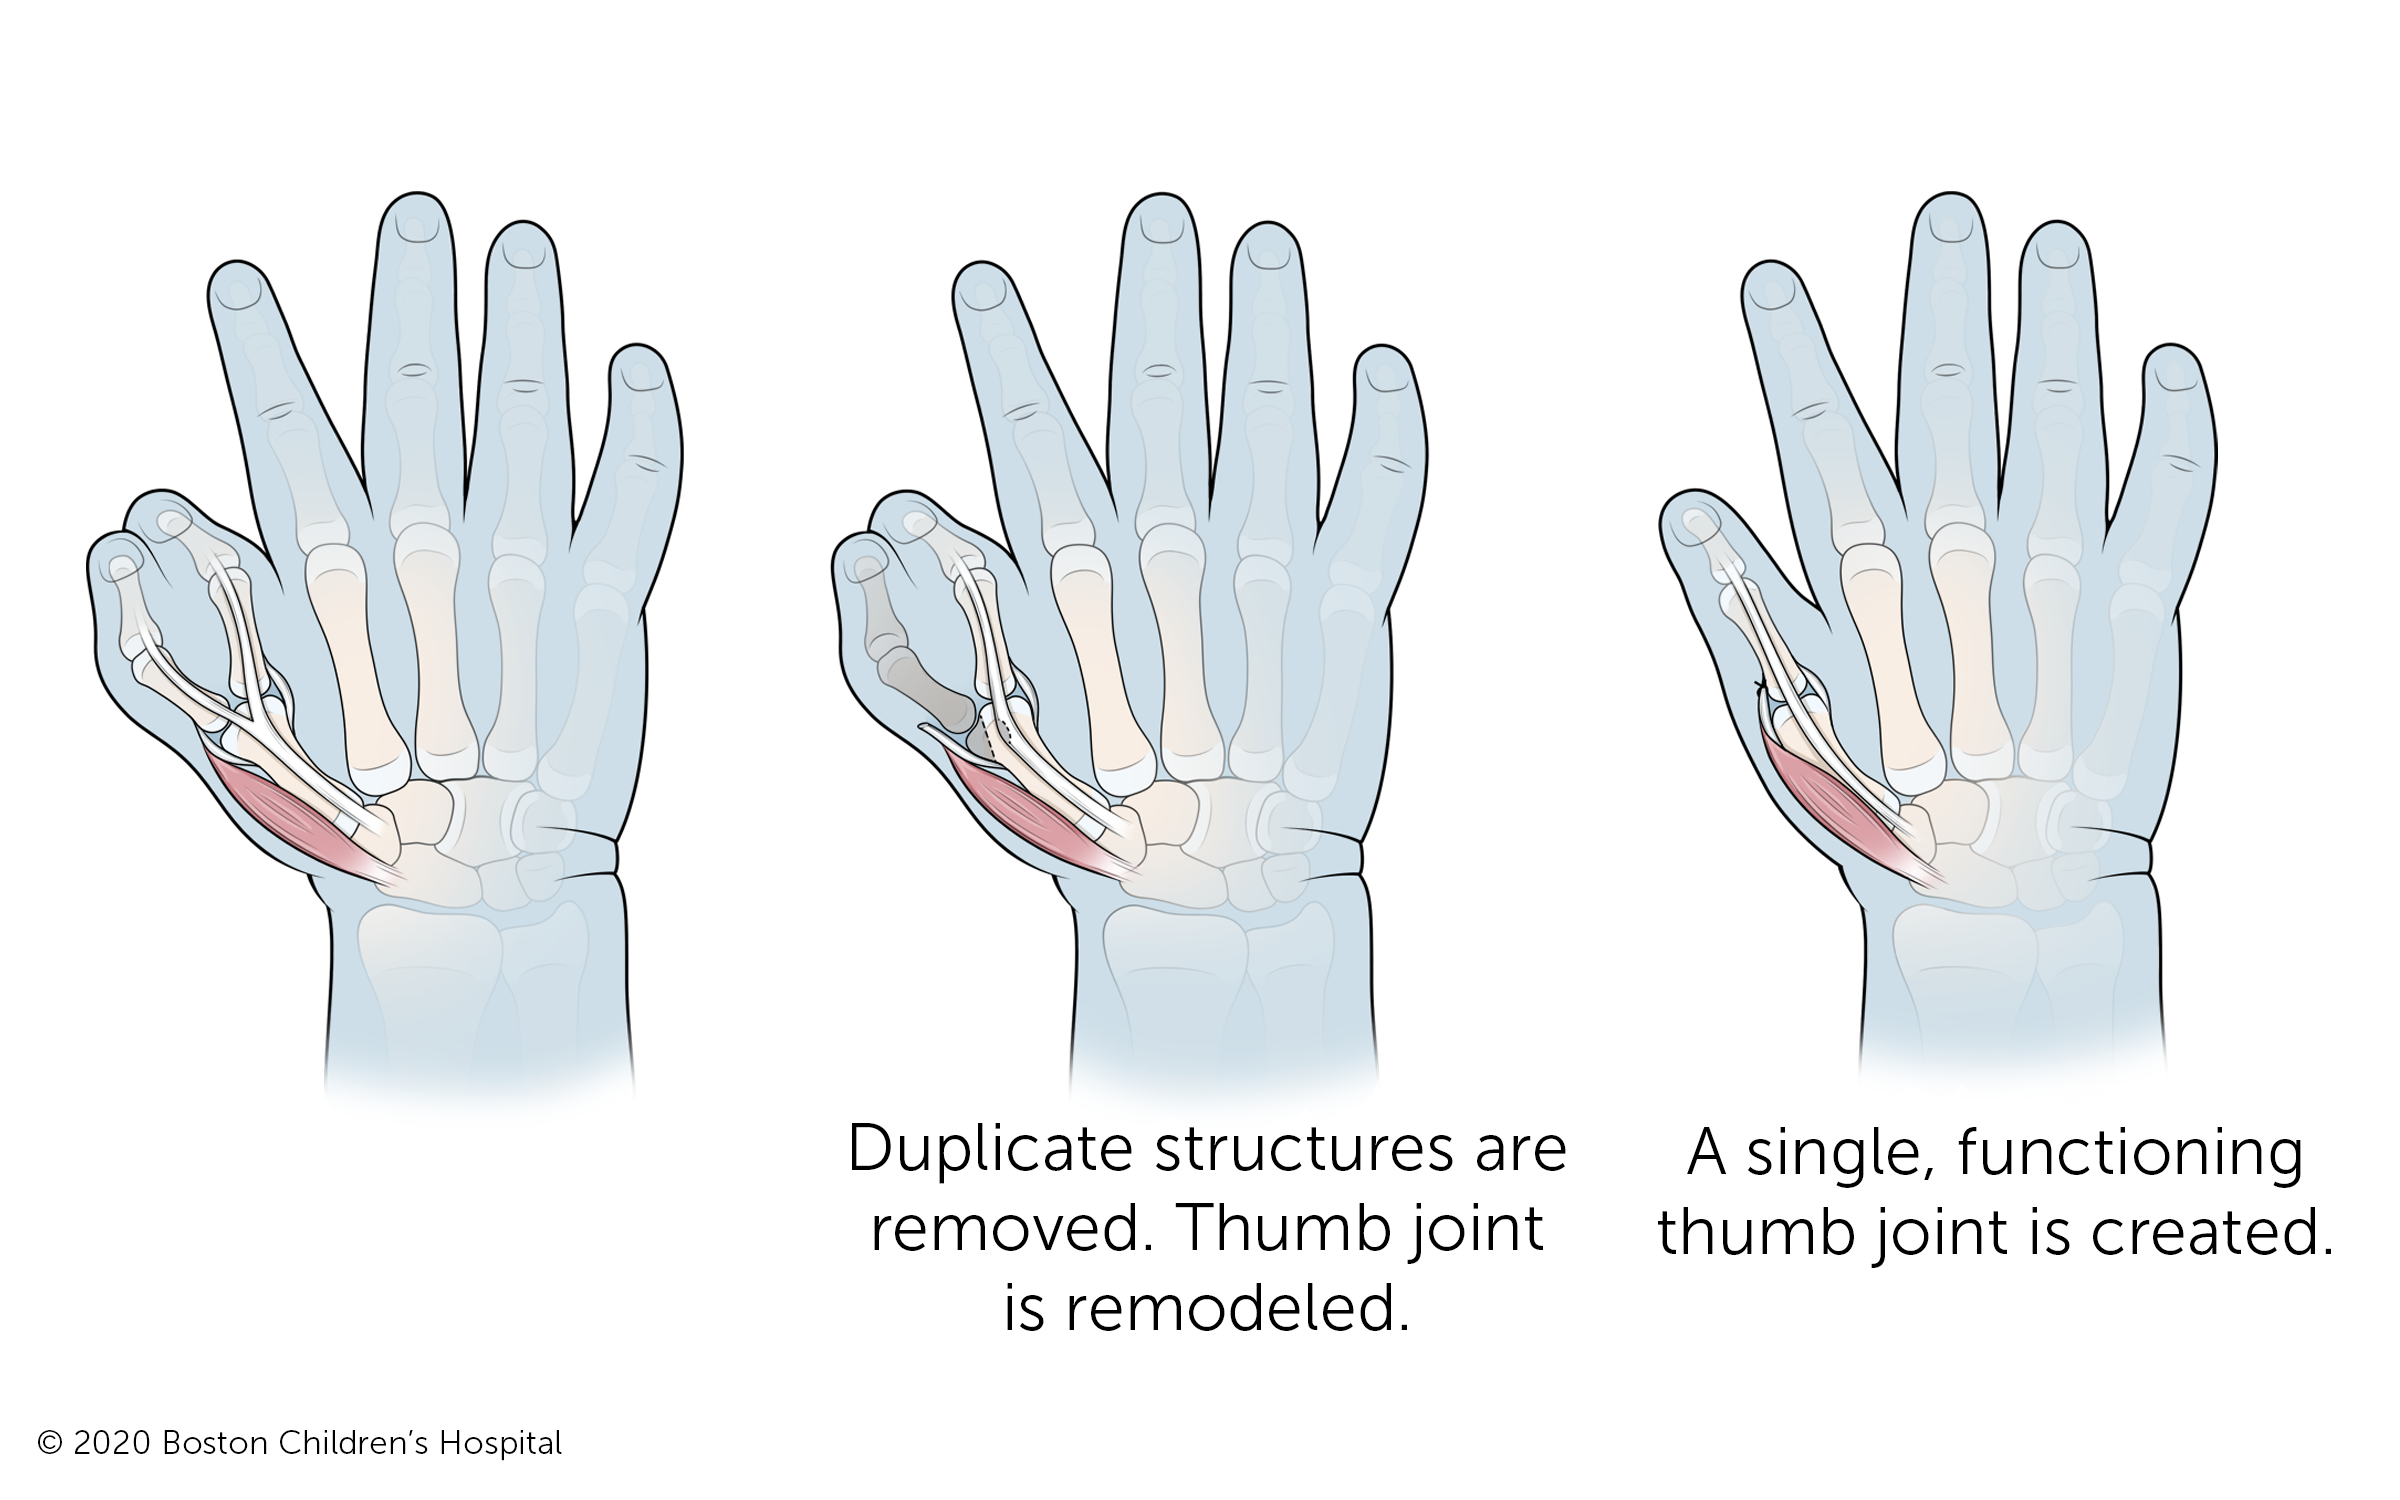 The duplicate bone and other structures are removed and the thumb joint where the two bones previously branched off is remodeled to create a single, functioning thumb and thumb joint.